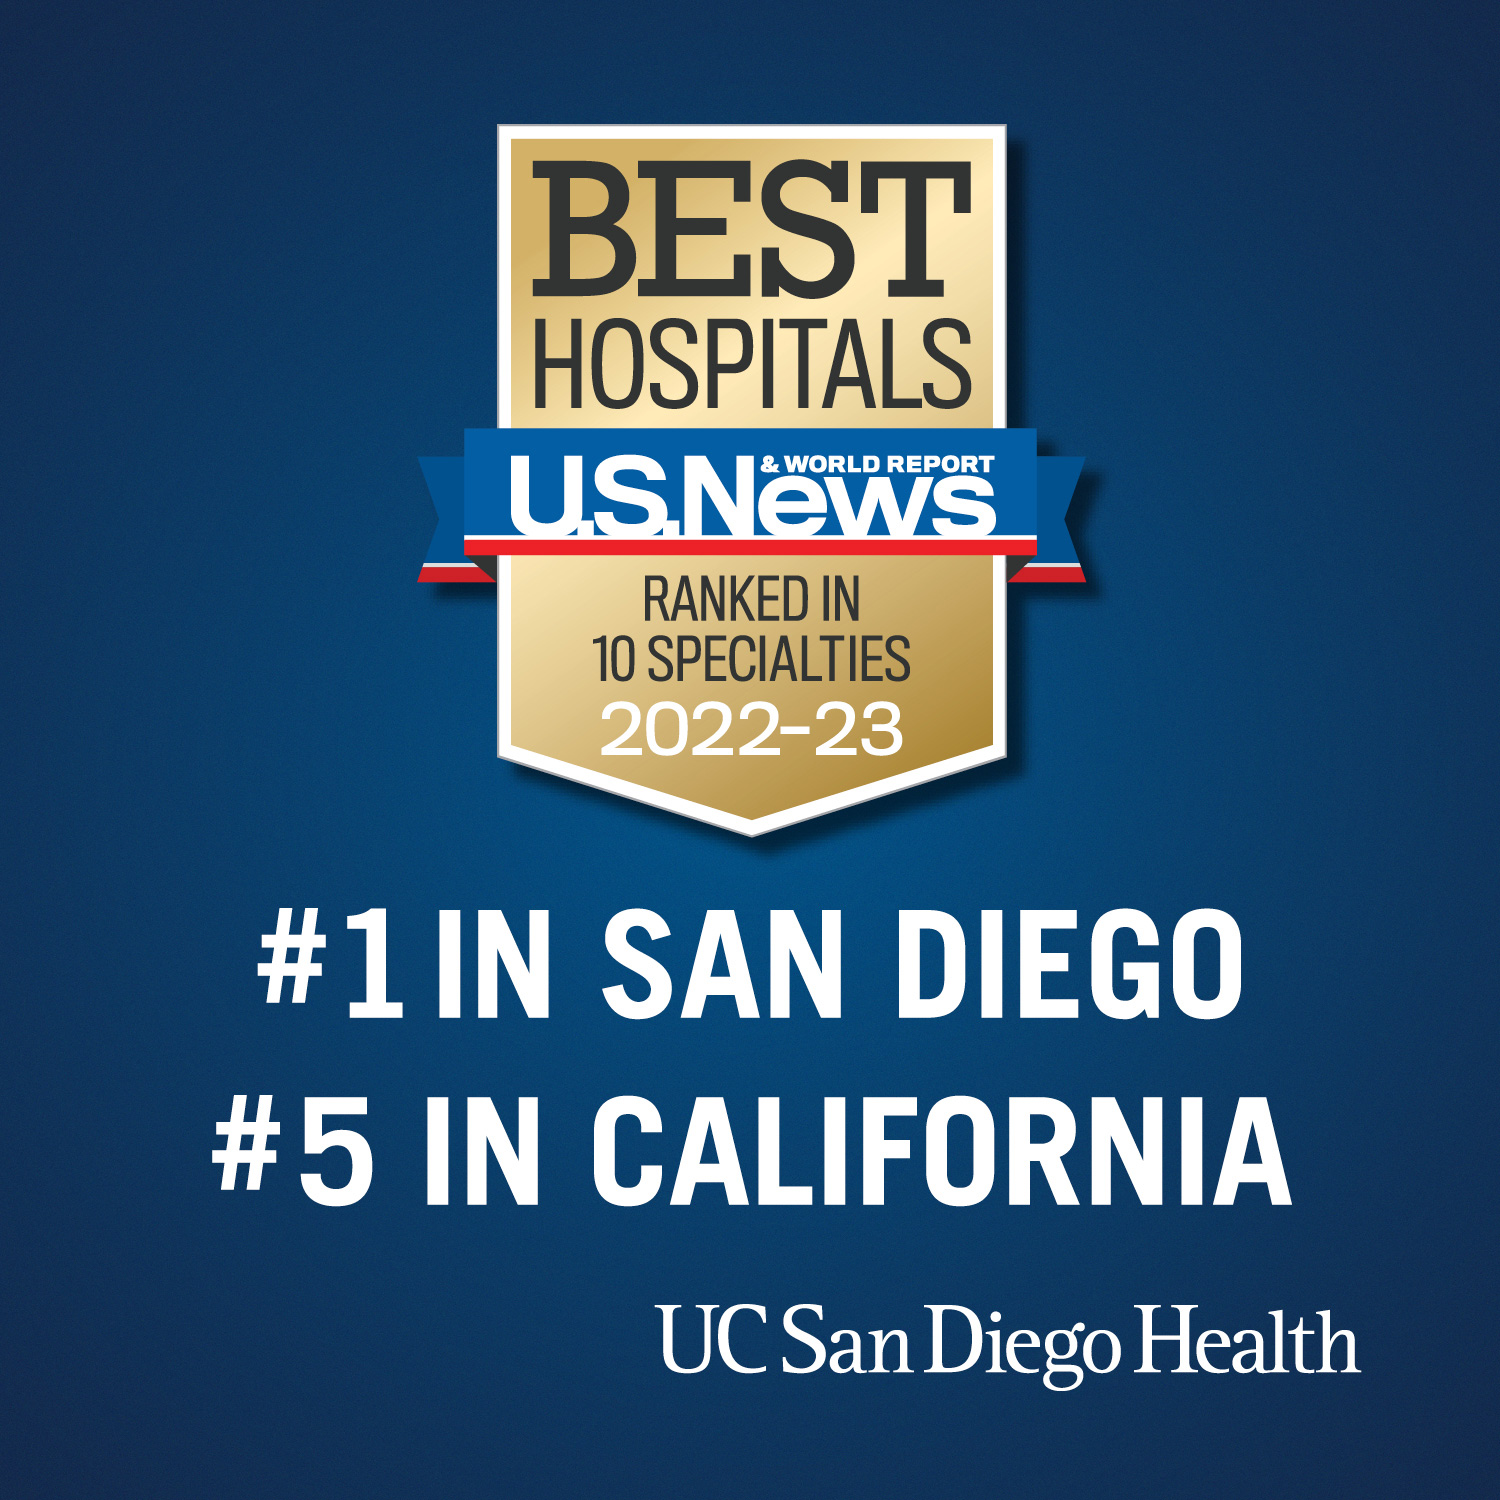 U.S News & World Report badge for nationally ranked care in 10 specialties, including #1 in San Diego and #5 in California